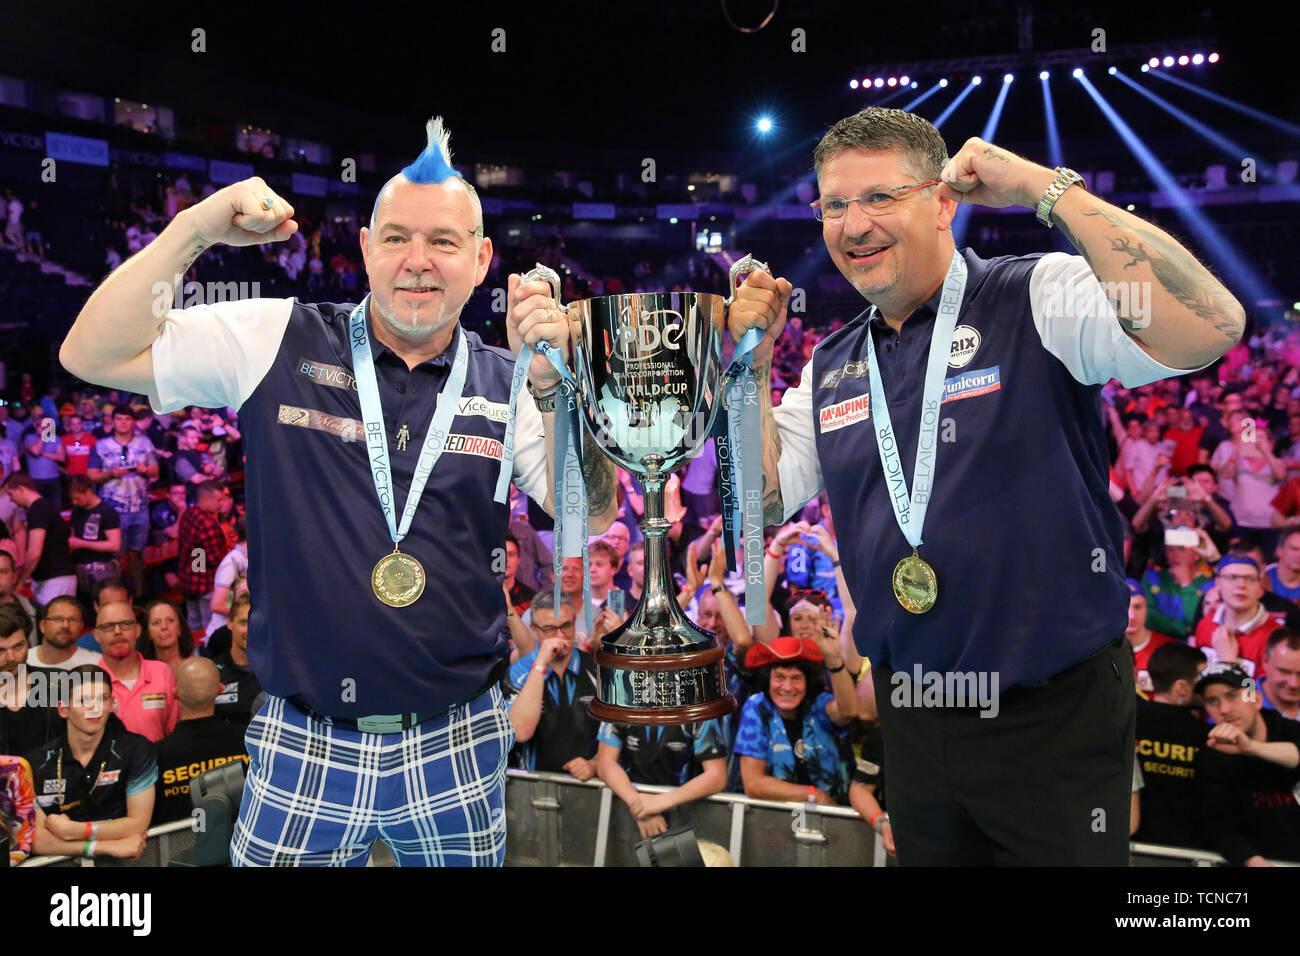 Hamburg, Germany. 09th June, 2019. Darts: Team World Championship, Final: Scotland - Ireland. The winning team Peter Wright (l) and Gary Anderson from Scotland pose with their trophy after the victory. Credit: Bodo Marks/dpa/Alamy Live News Stock Photo